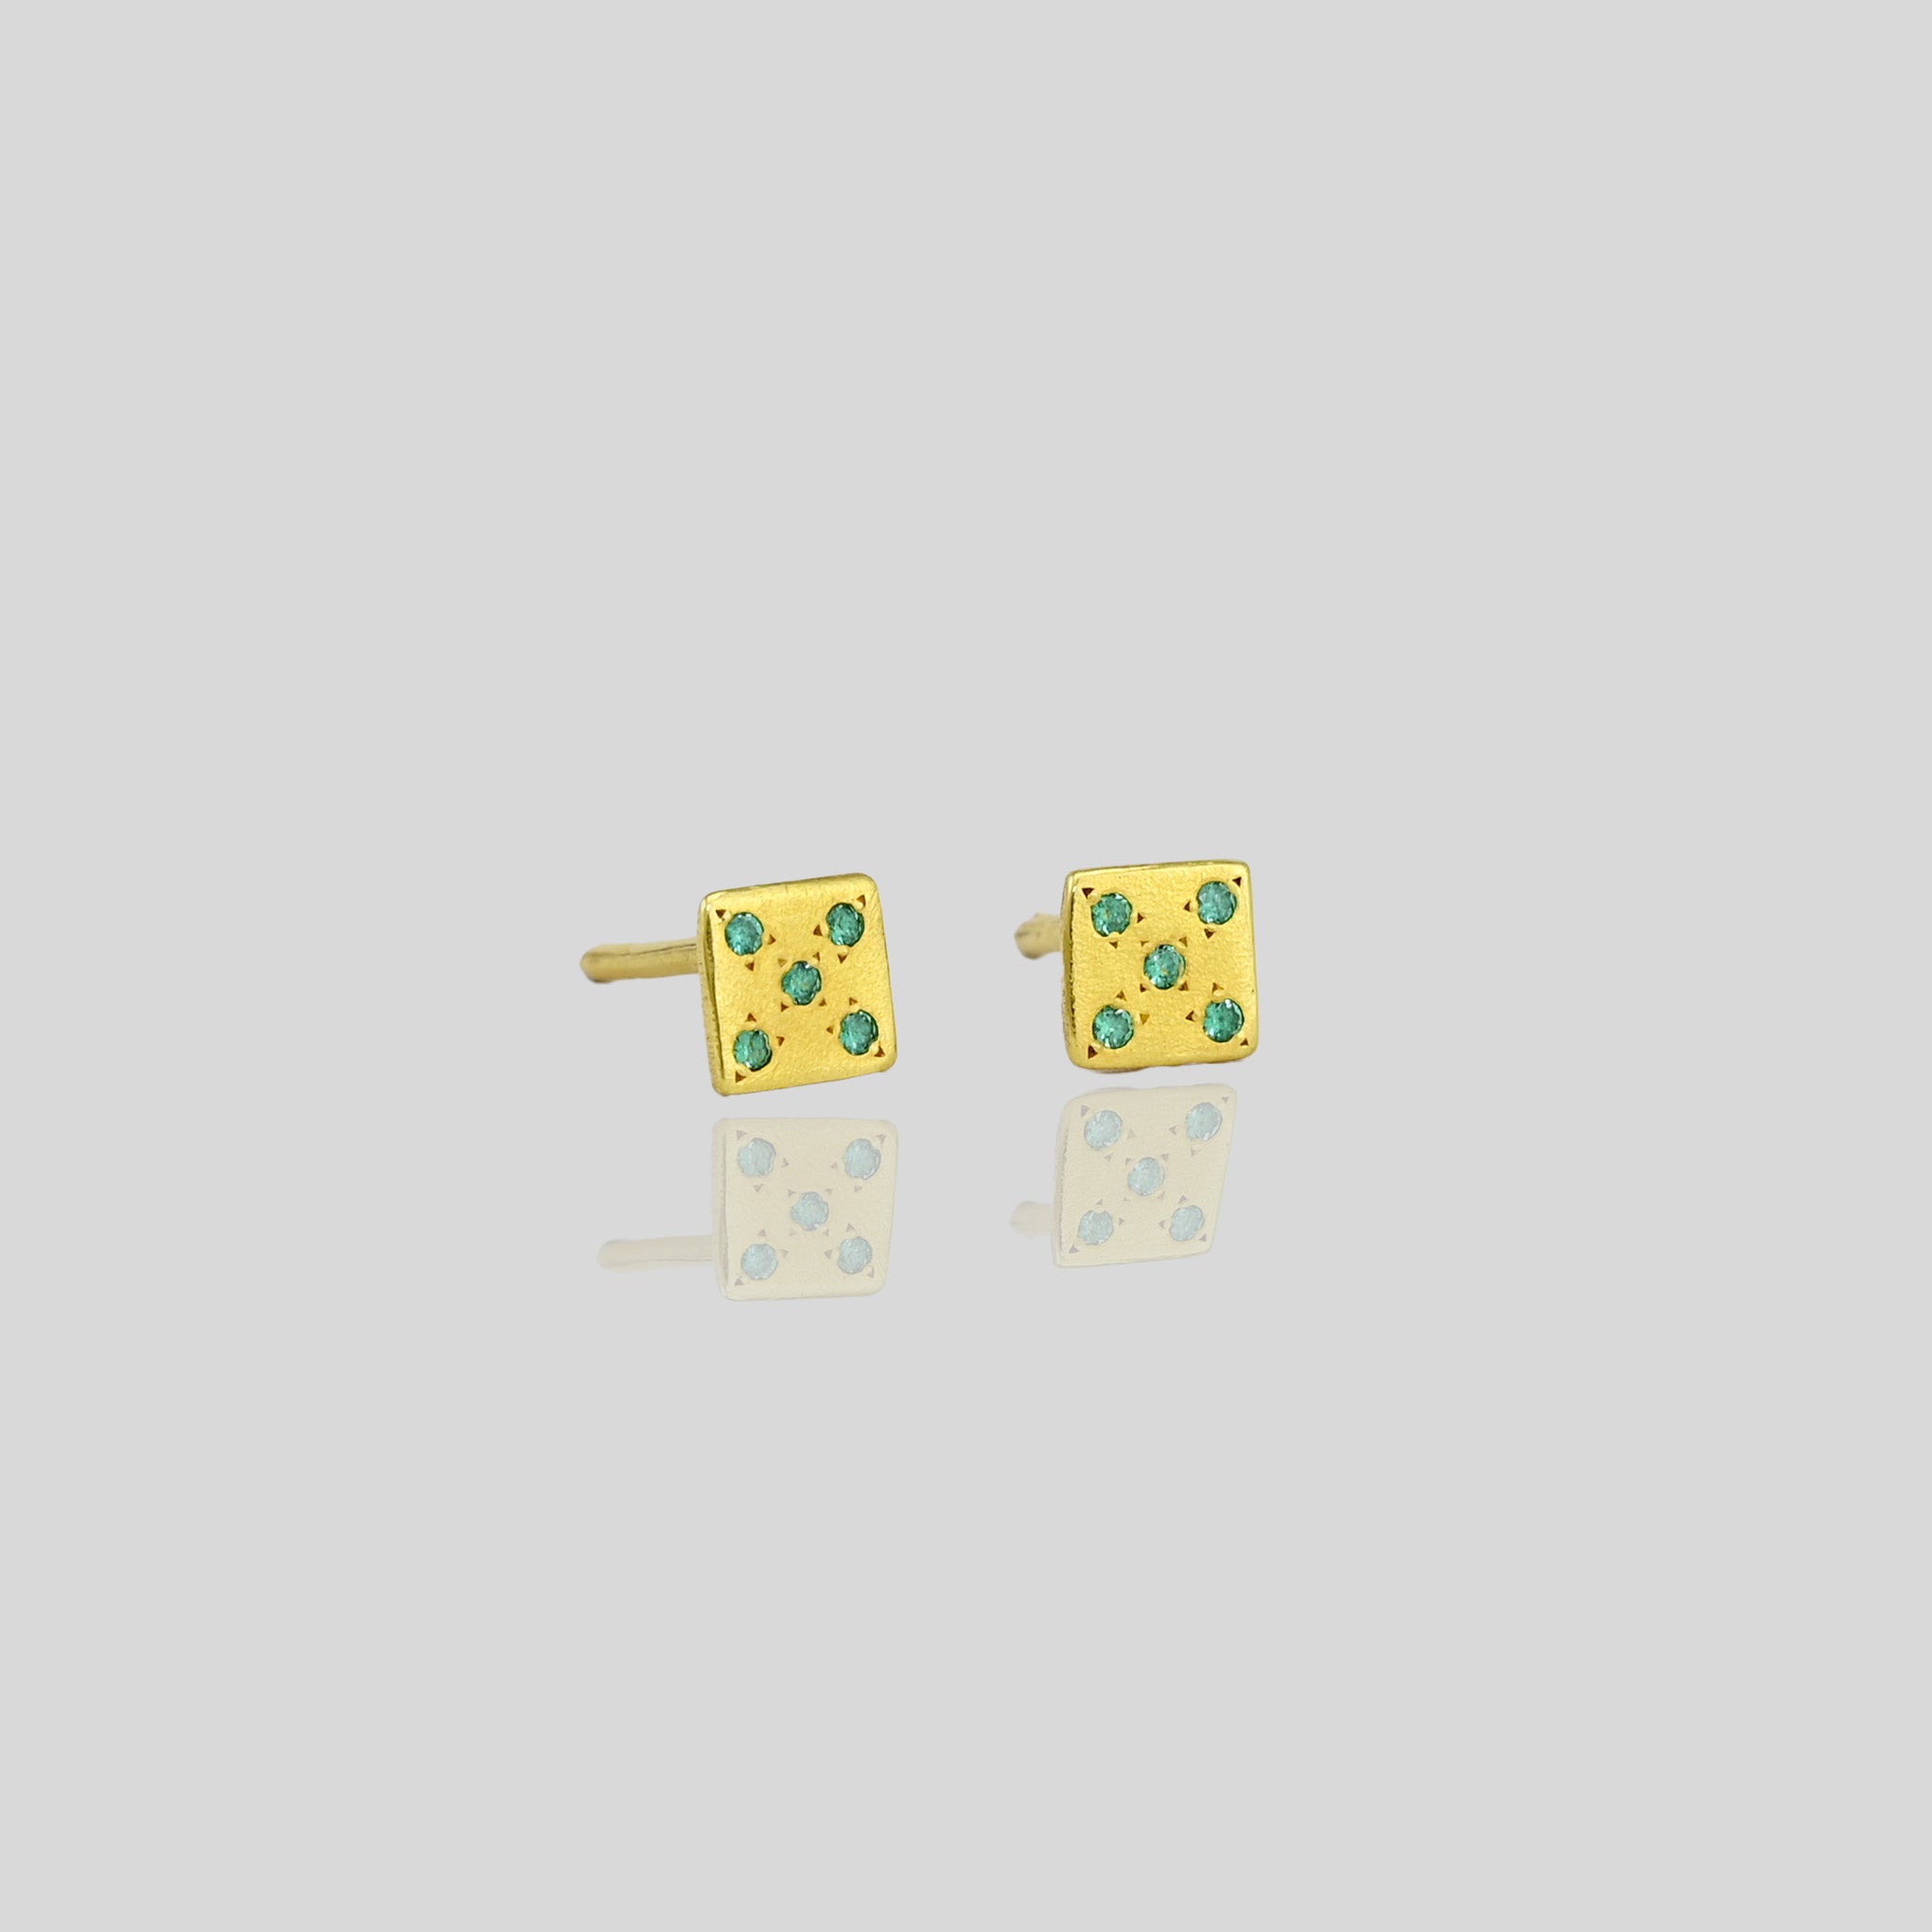 Close up of Lucky Charm Emerald Gold Stud Earrings with Playful Dice Pattern